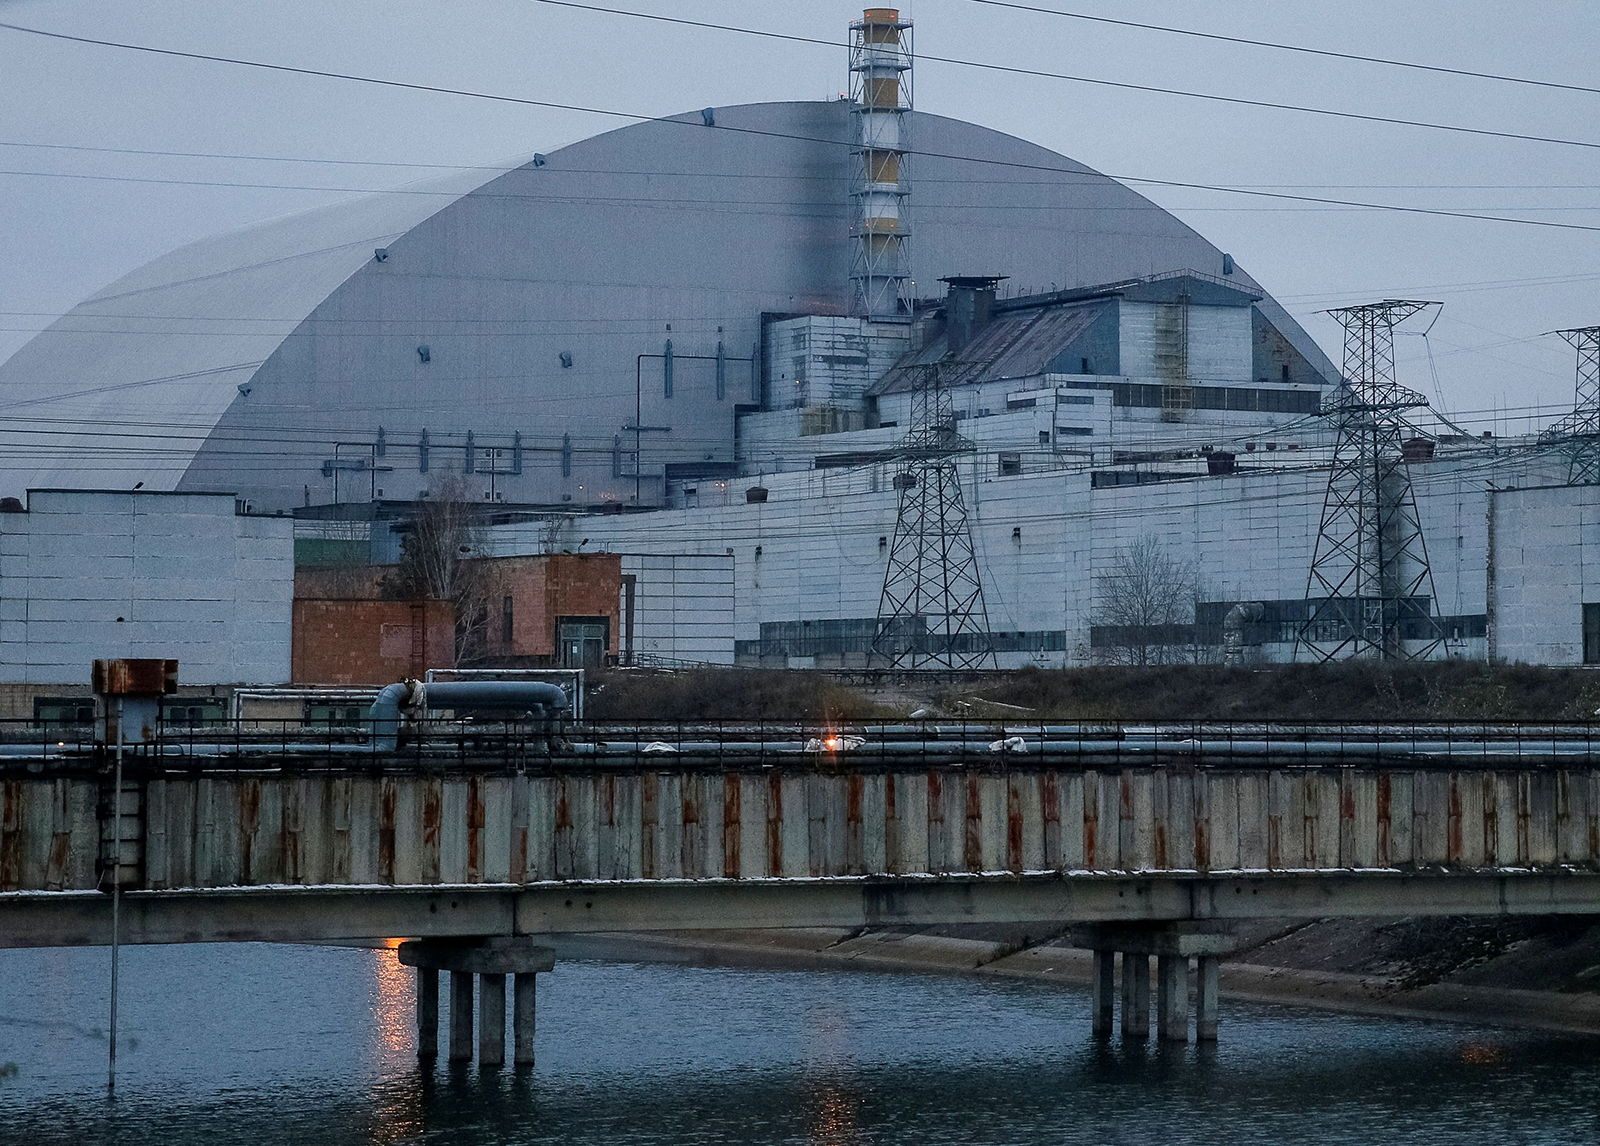 A general view shows the structure over the old sarcophagus covering the damaged fourth reactor at the Chernobyl Nuclear Power Plant in Chernobyl, Ukraine November 22, 2018. 